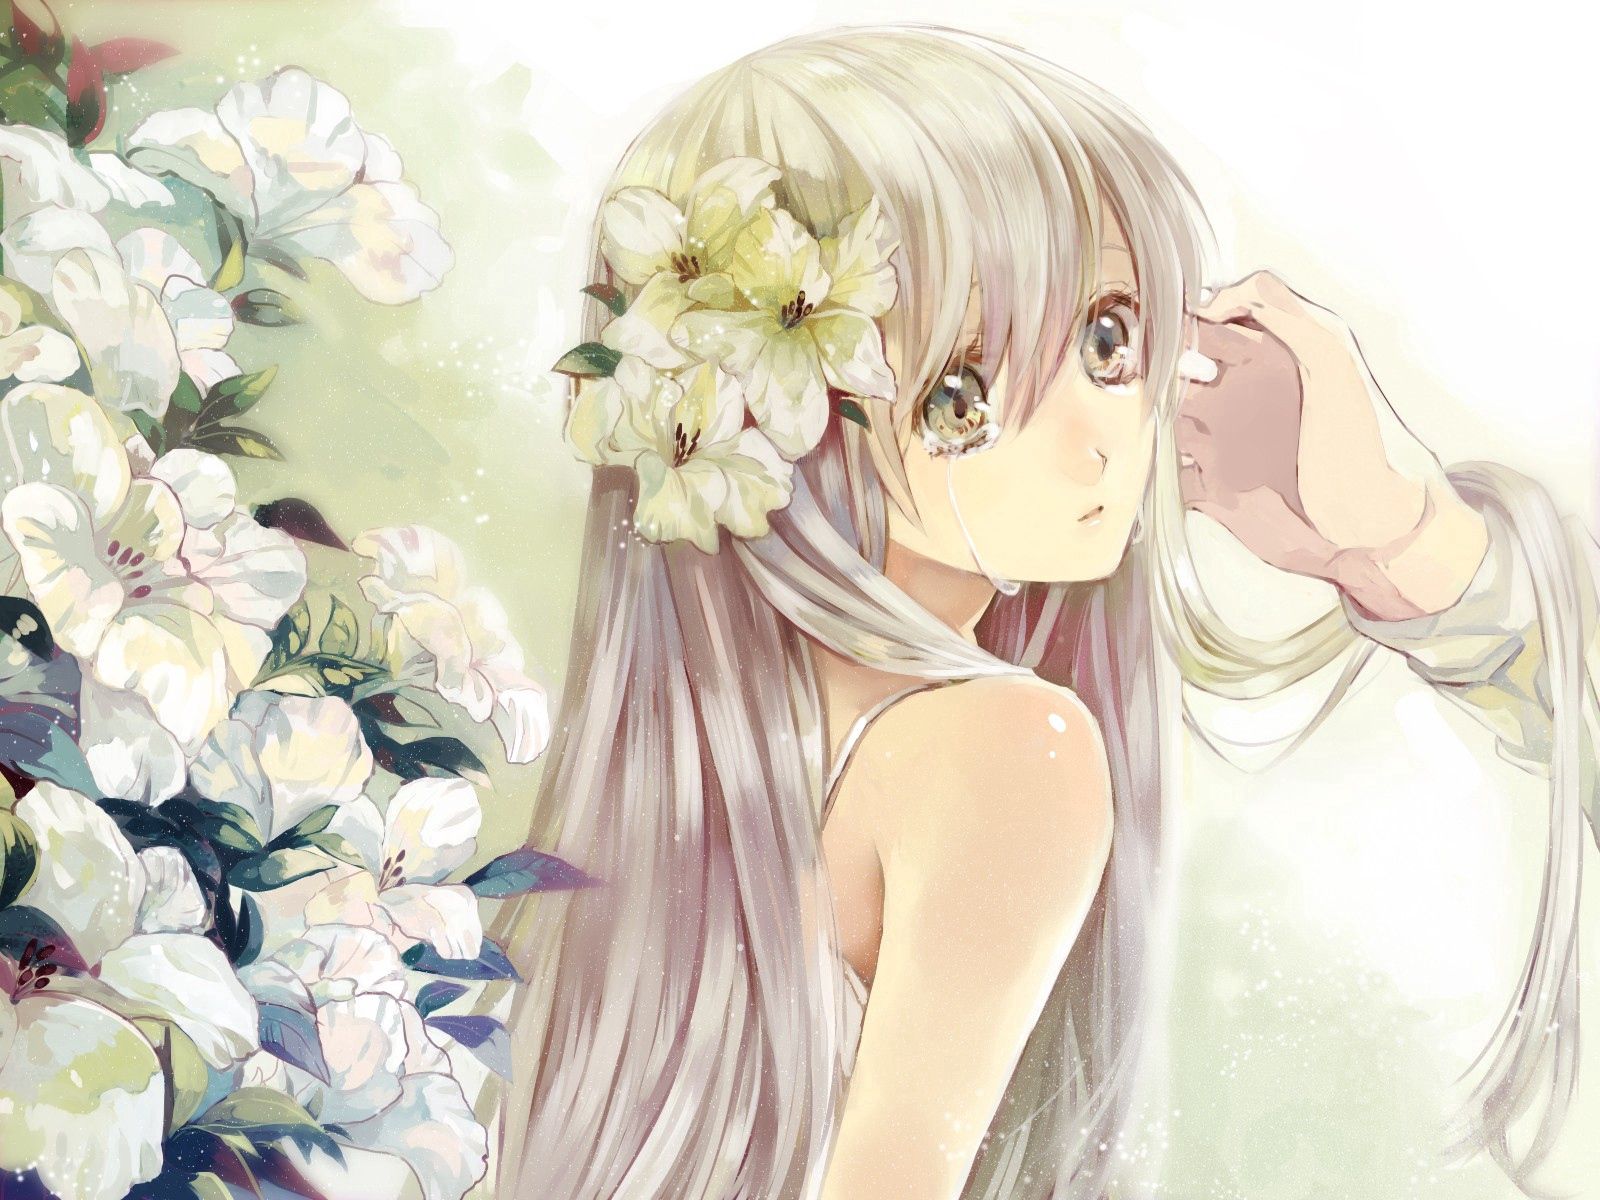 blonde, sadness, anime, flowers, girl, tears for android